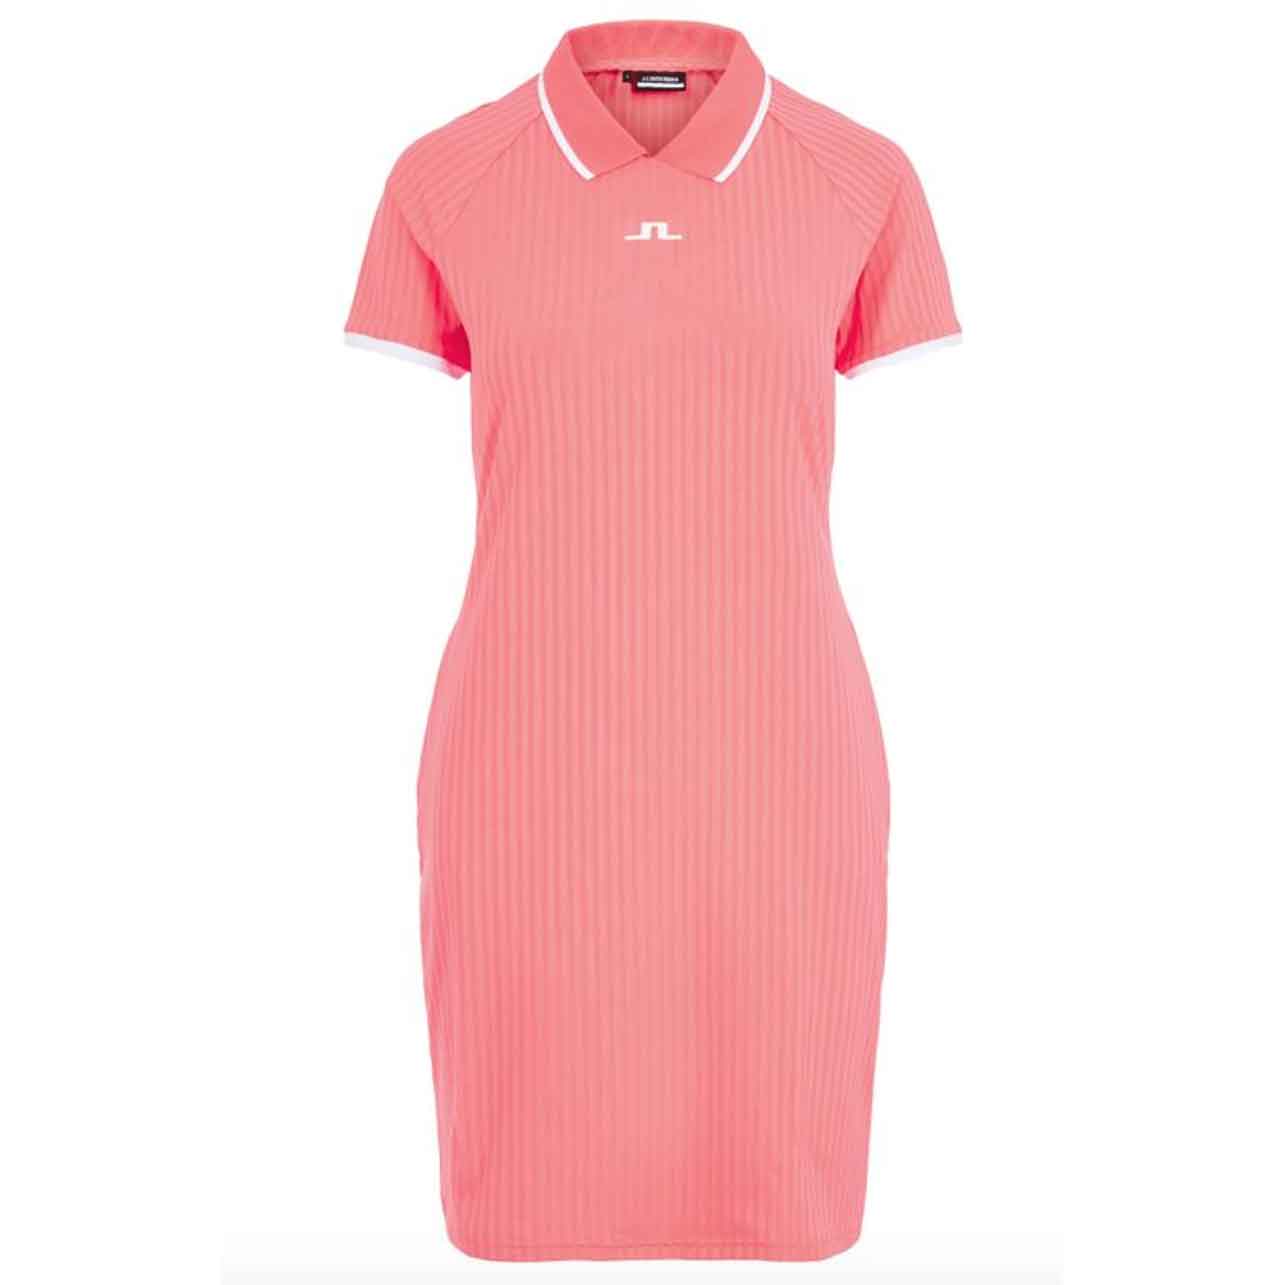 Gear up for spring golf with these 5 stylish new arrivals from J.Lindeberg